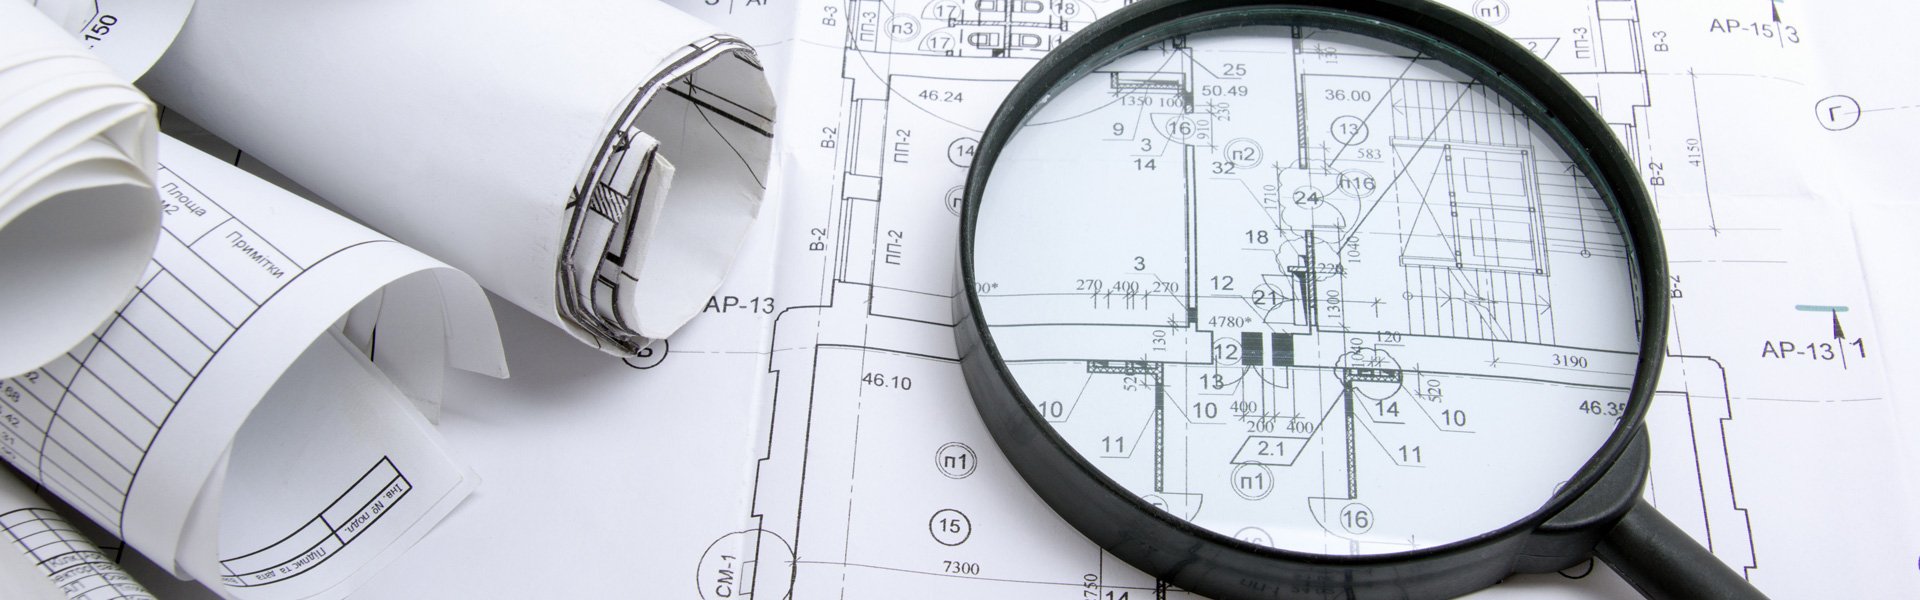 Magnifying glass on blueprints